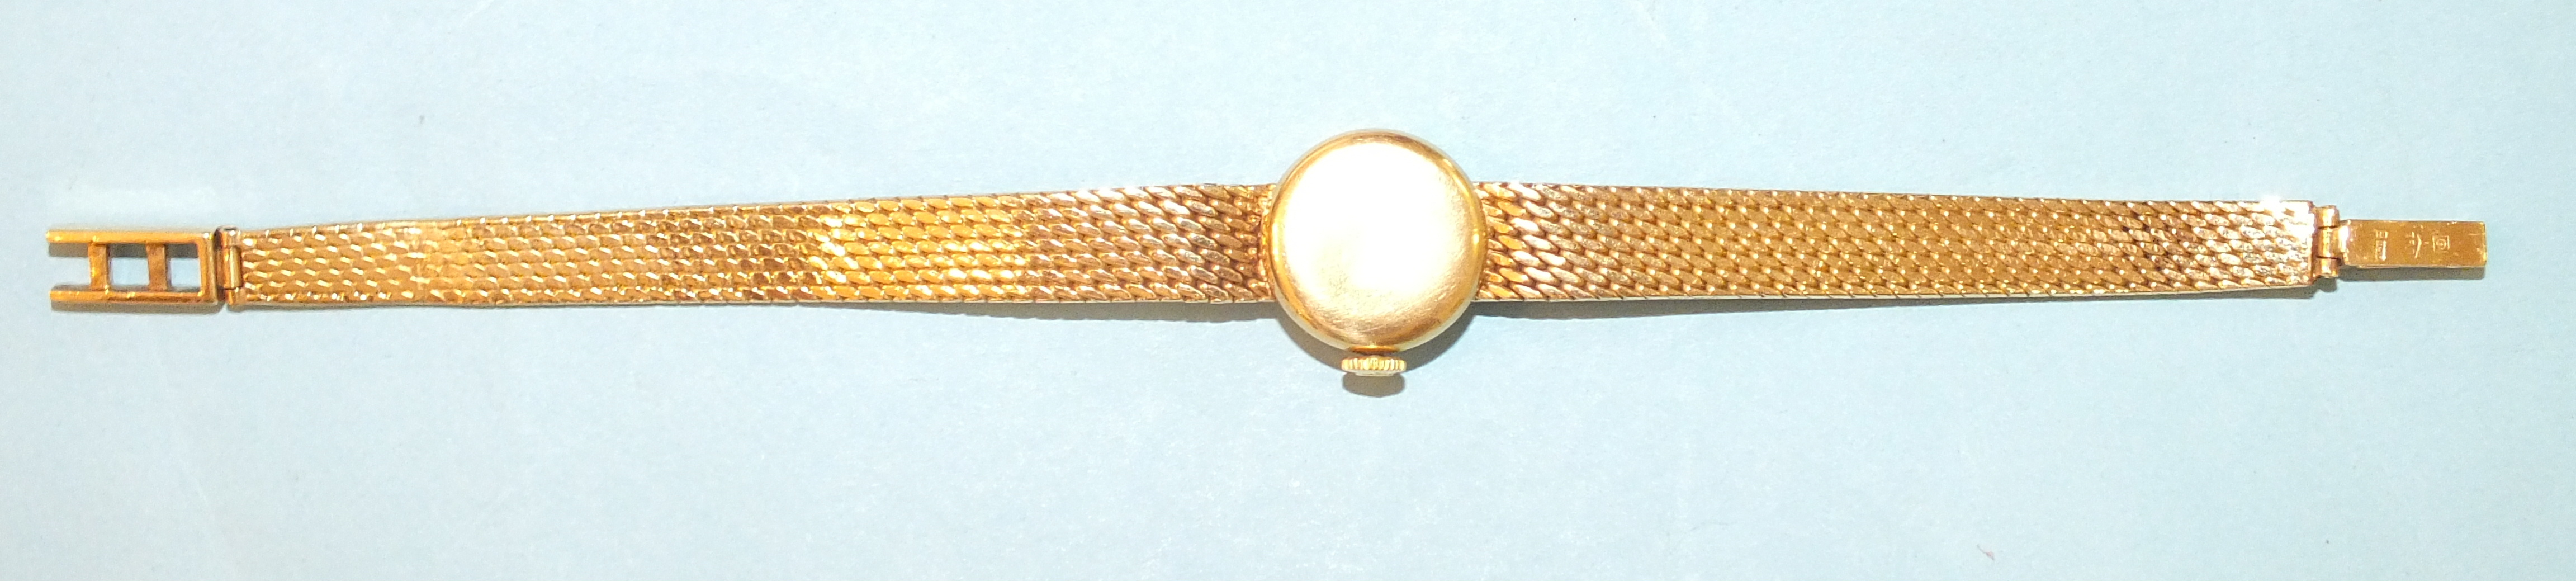 Cyma, a lady's 18ct-gold-cased wrist watch with 18ct gold integral bracelet, gross weight 24.3g. - Image 3 of 3